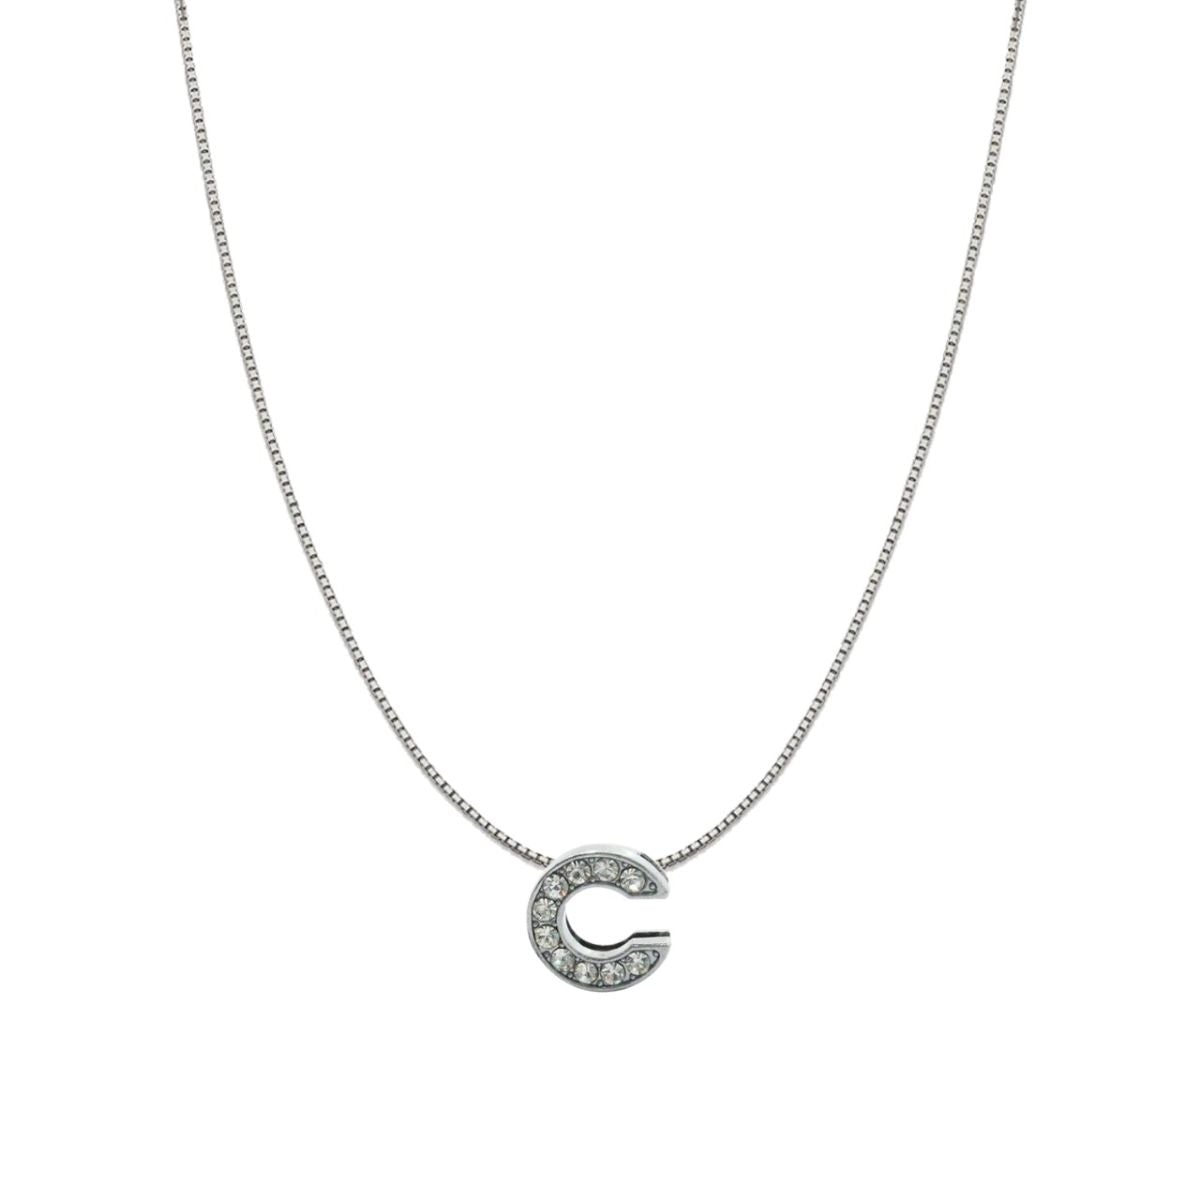 Buy Shaya by CaratLane Shirley C Necklace in 925 Oxidised Silver Online